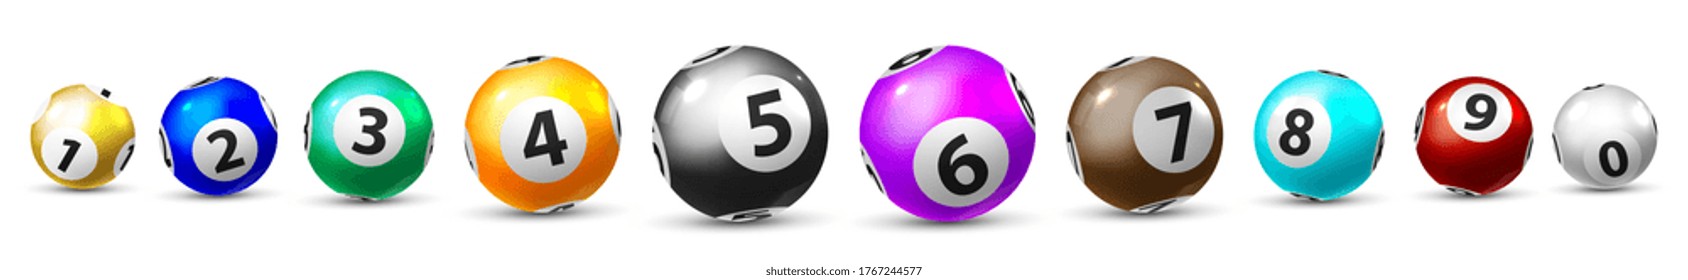 Bingo game balls. Isolated ten lottery ball icon set for leisure lottery sport game. Realistic shiny sphere bingo balls with numbers. Casino, luck opportunity in gambling